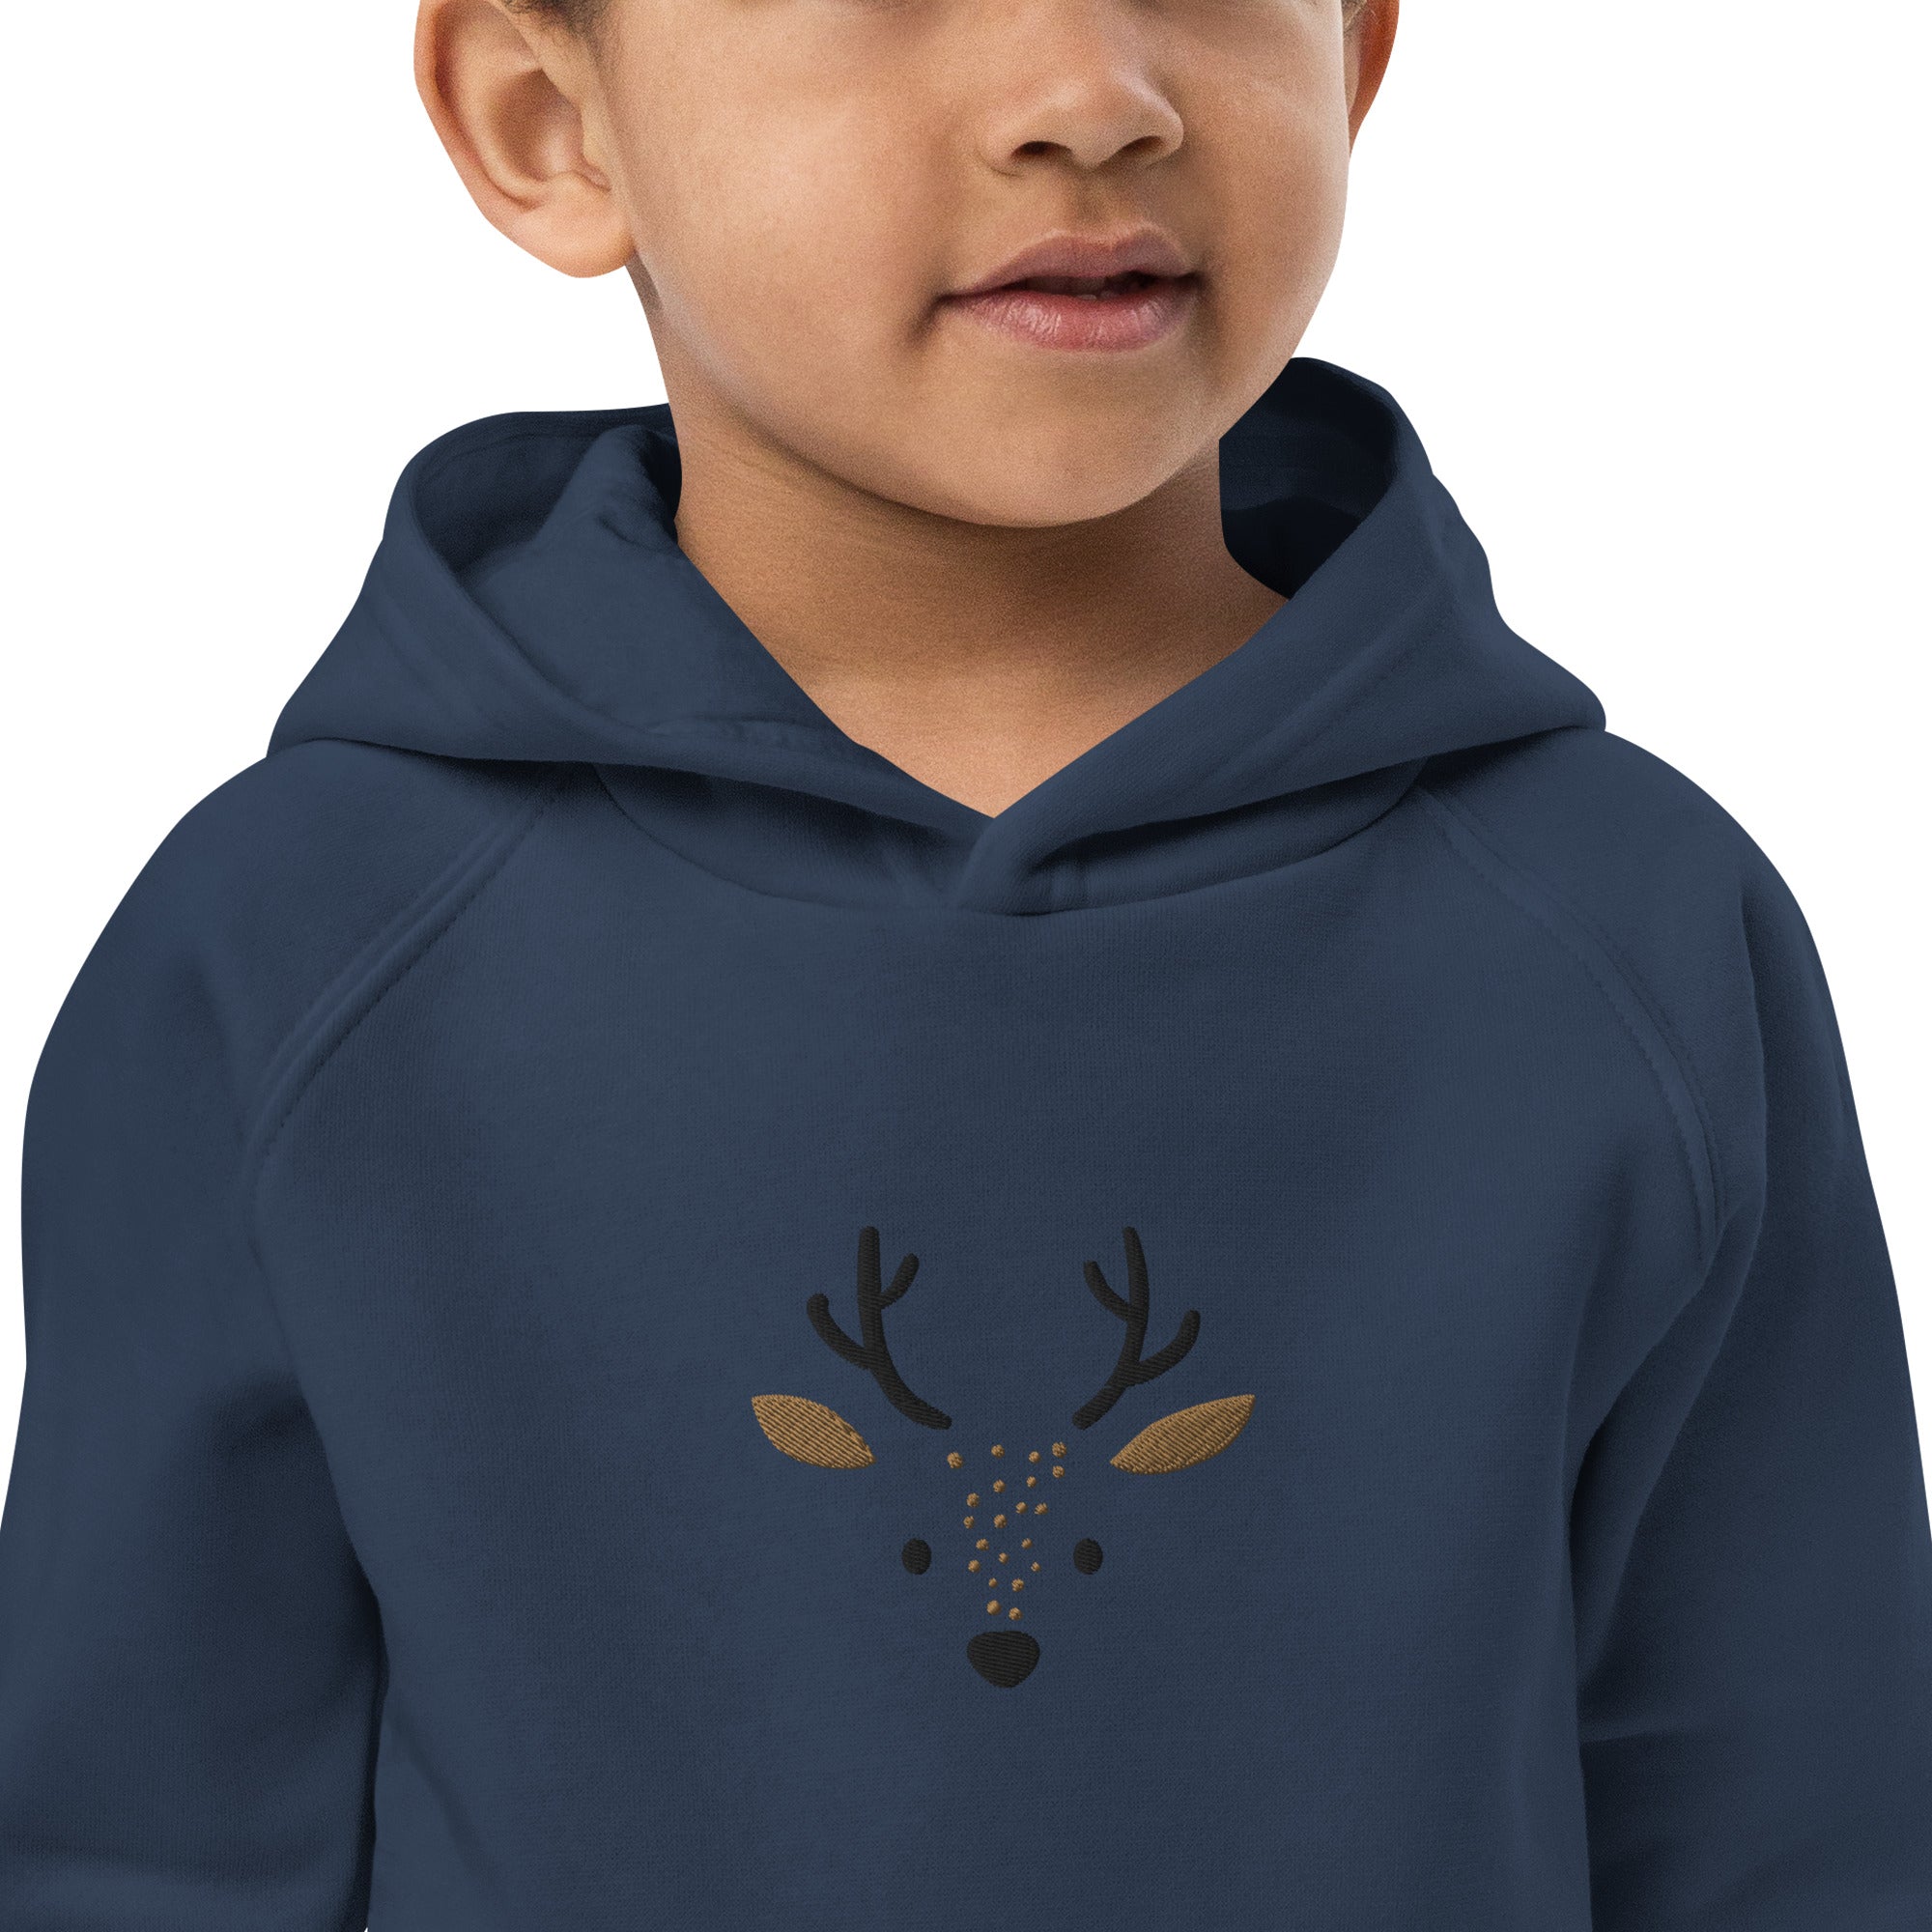 Deer 1 Kids Eco Hoodie with cute animals, Organic Cotton pullover for children, gift idea for kids, soft hoodie for kids for Christmas-2